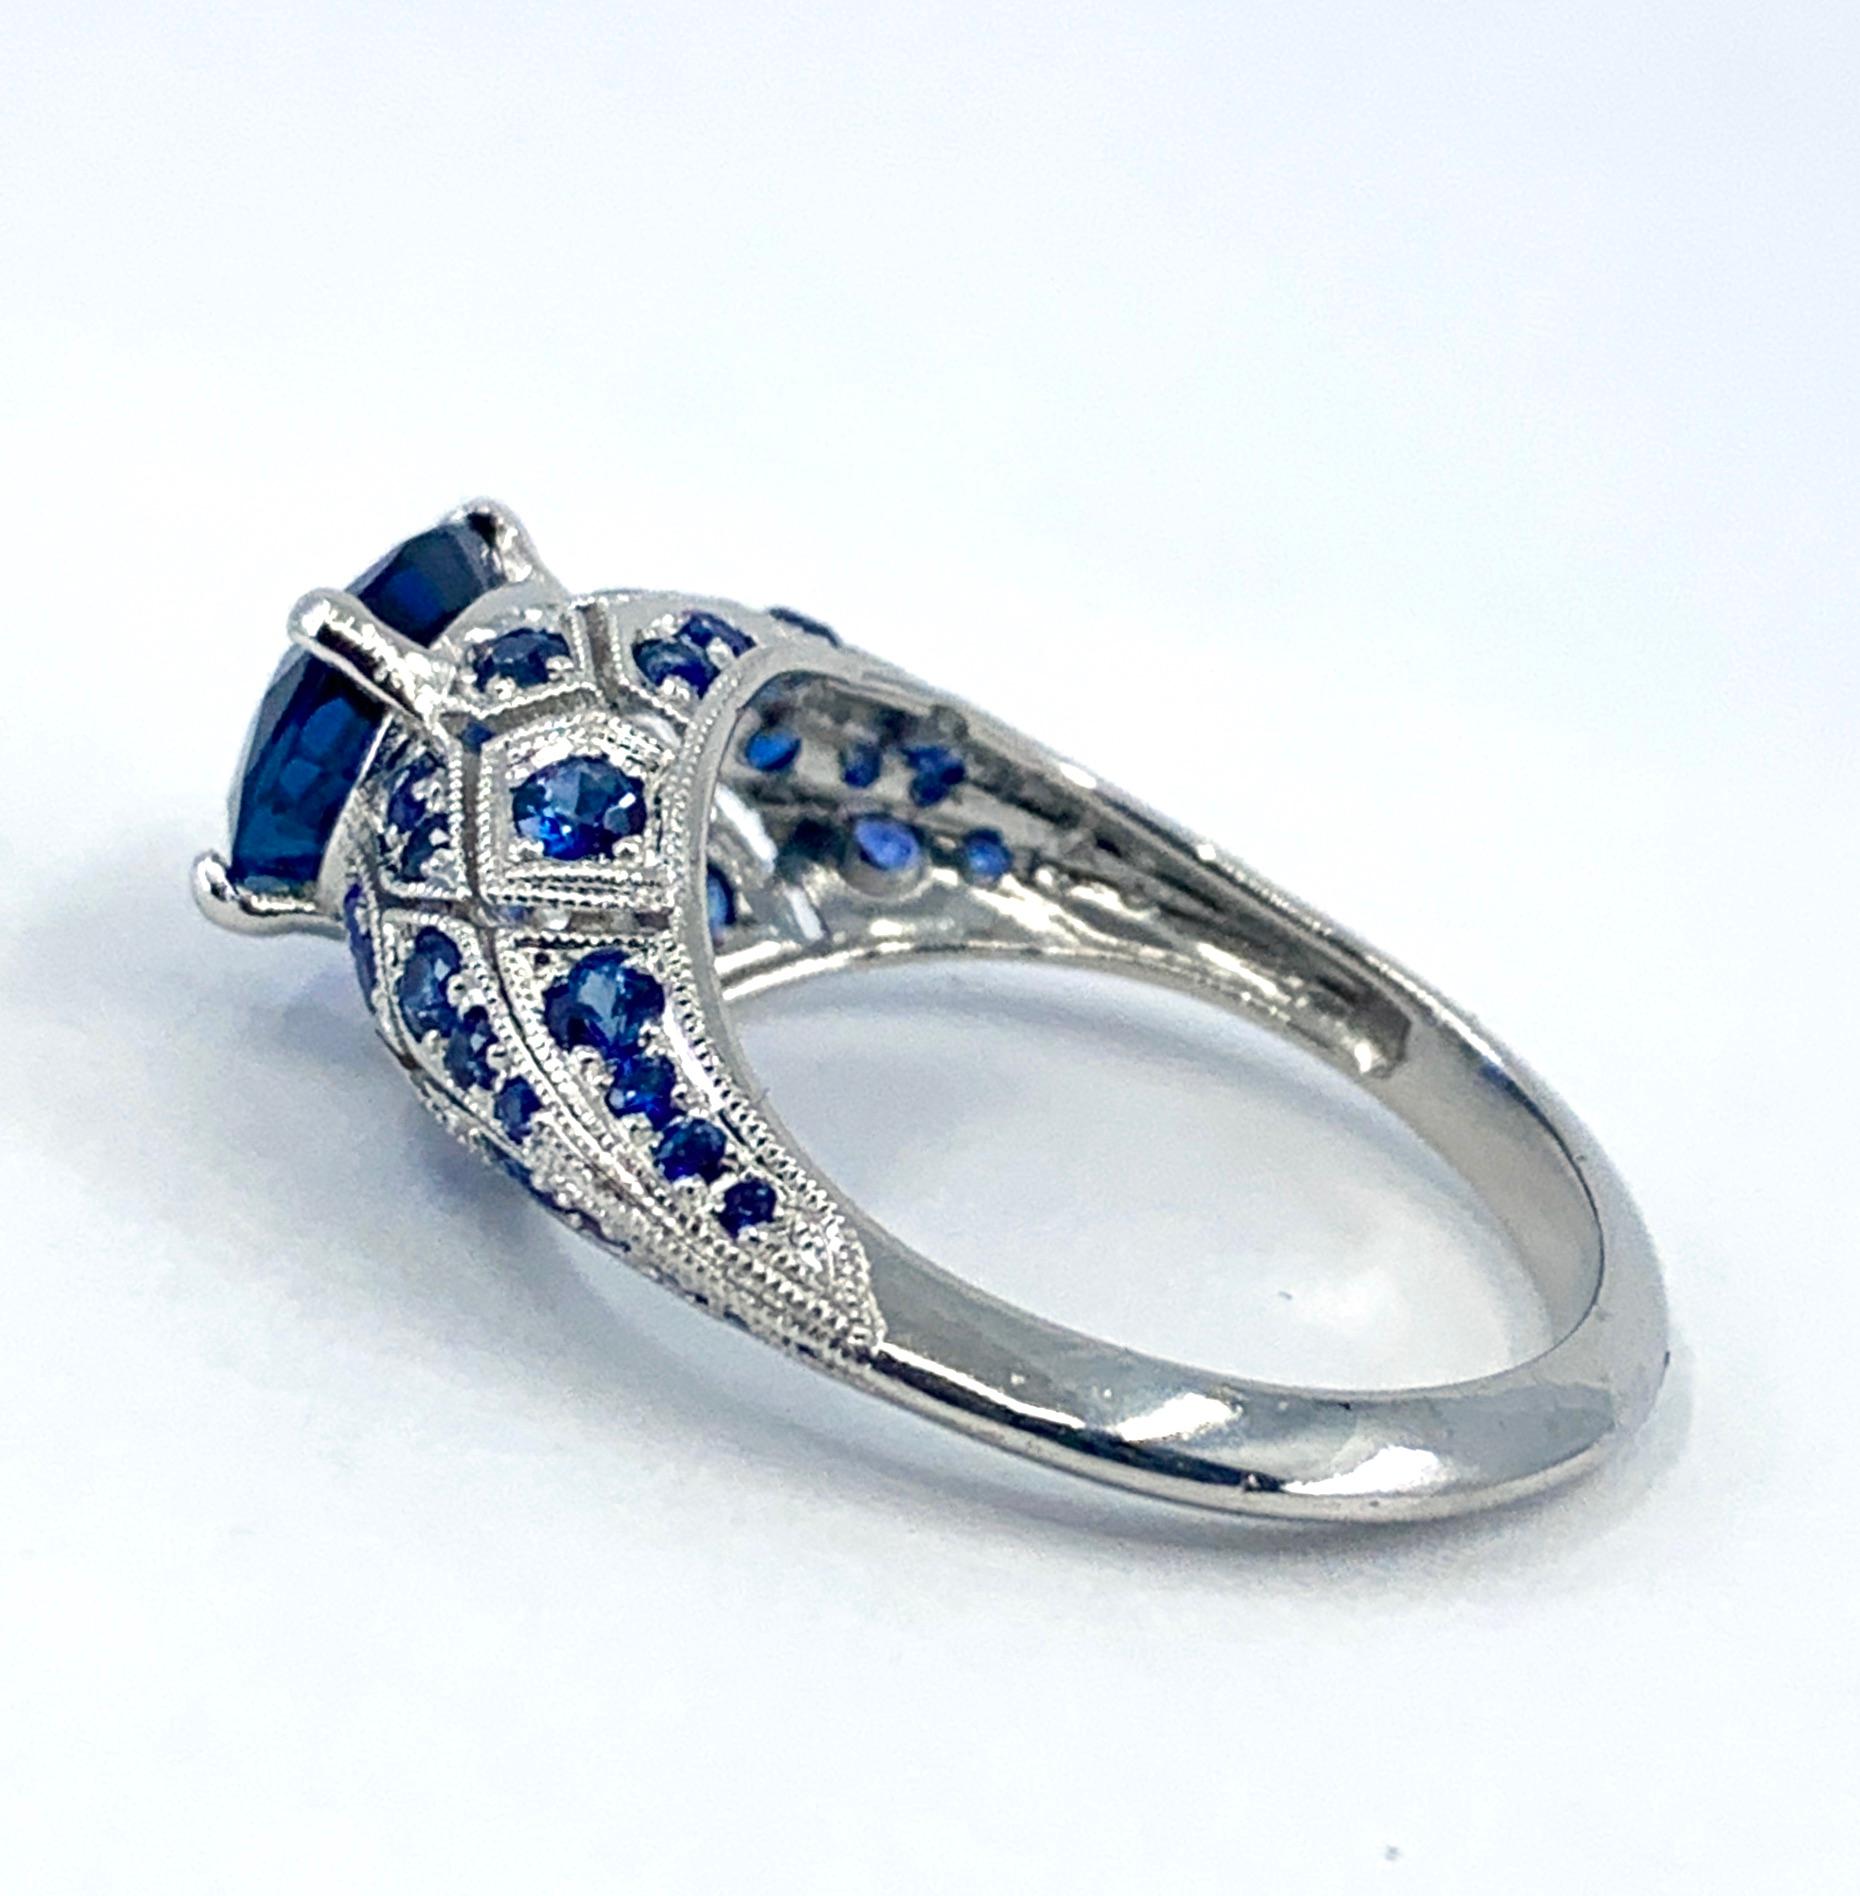 GIA-Certified 1.99 Carat Oval Sapphire in Platinum Edwardian-Style Bombe Setting For Sale 5